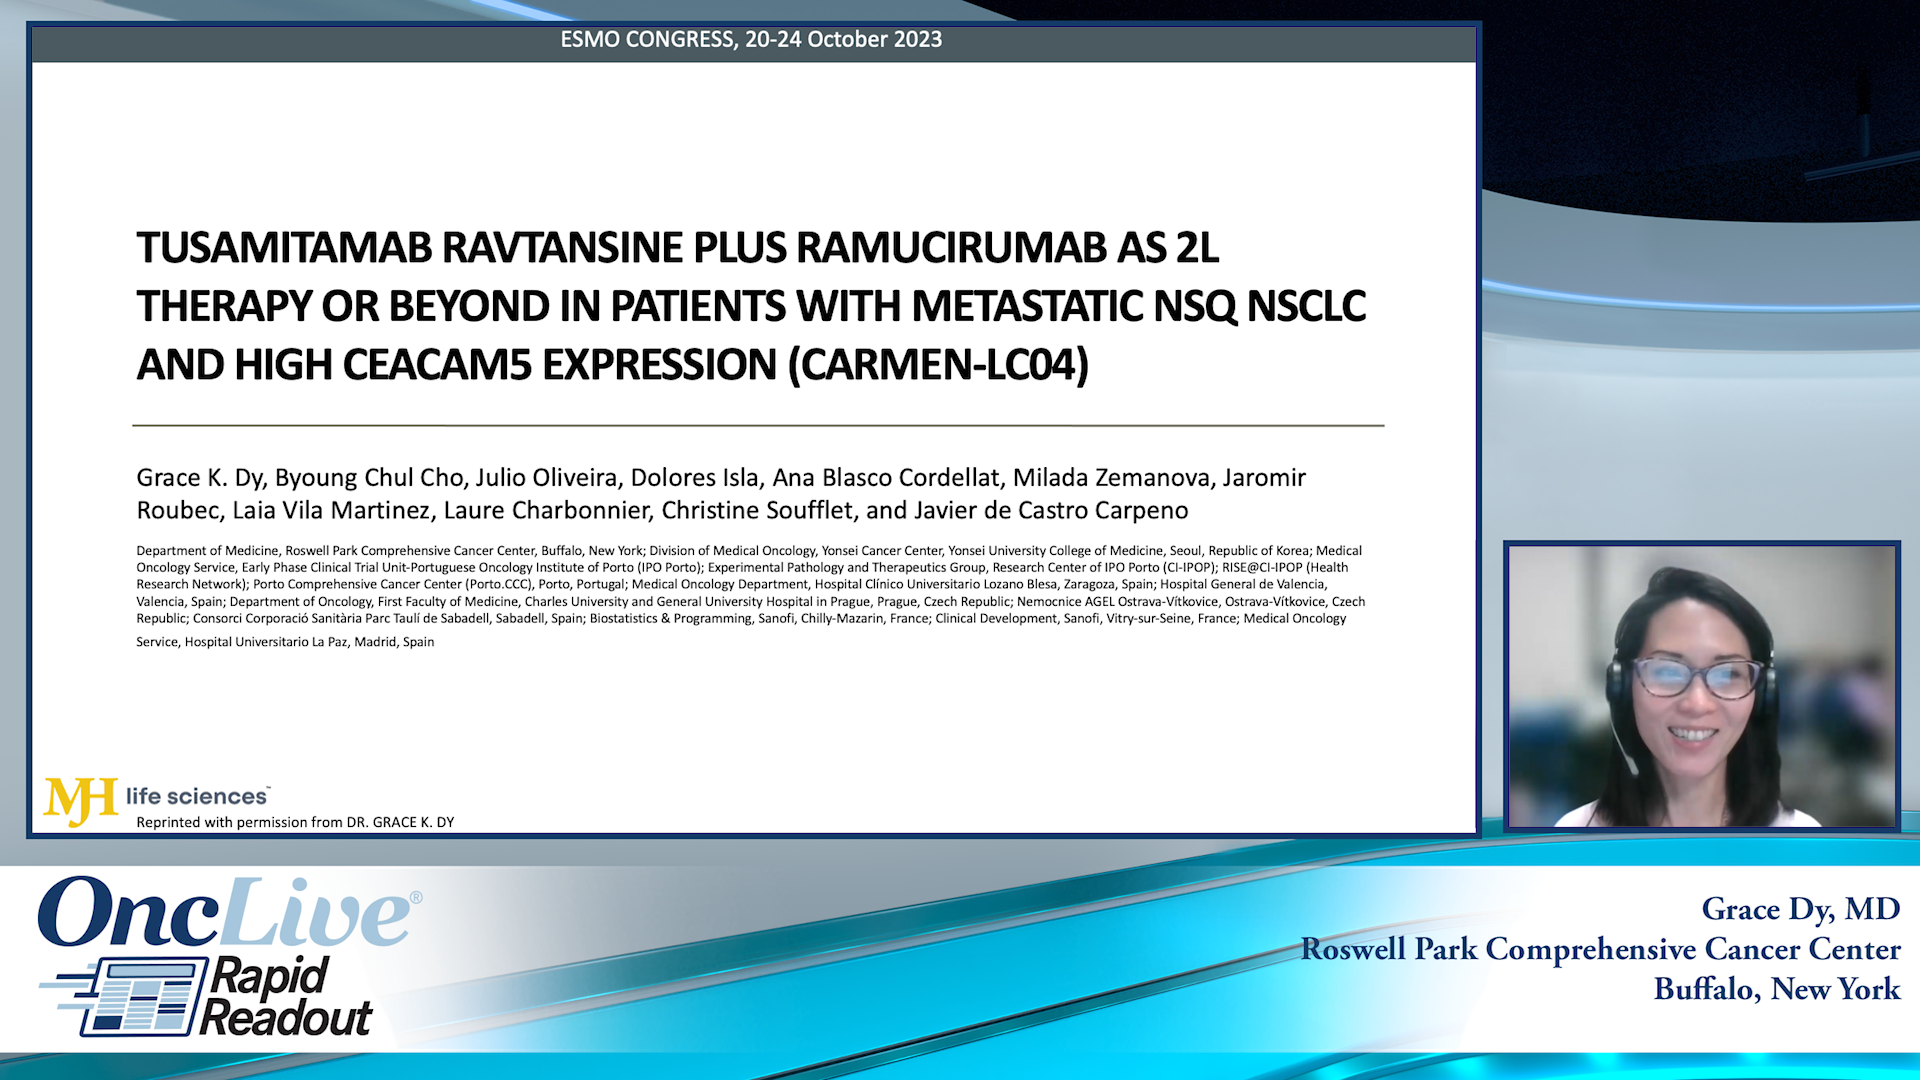 Tusamitamab Ravtansine Plus Ramucirumab as 2L Therapy or Beyond in Patients With Metastatic NSq NSCLC and High CEACAM5 Expression (CARMEN-LC04)